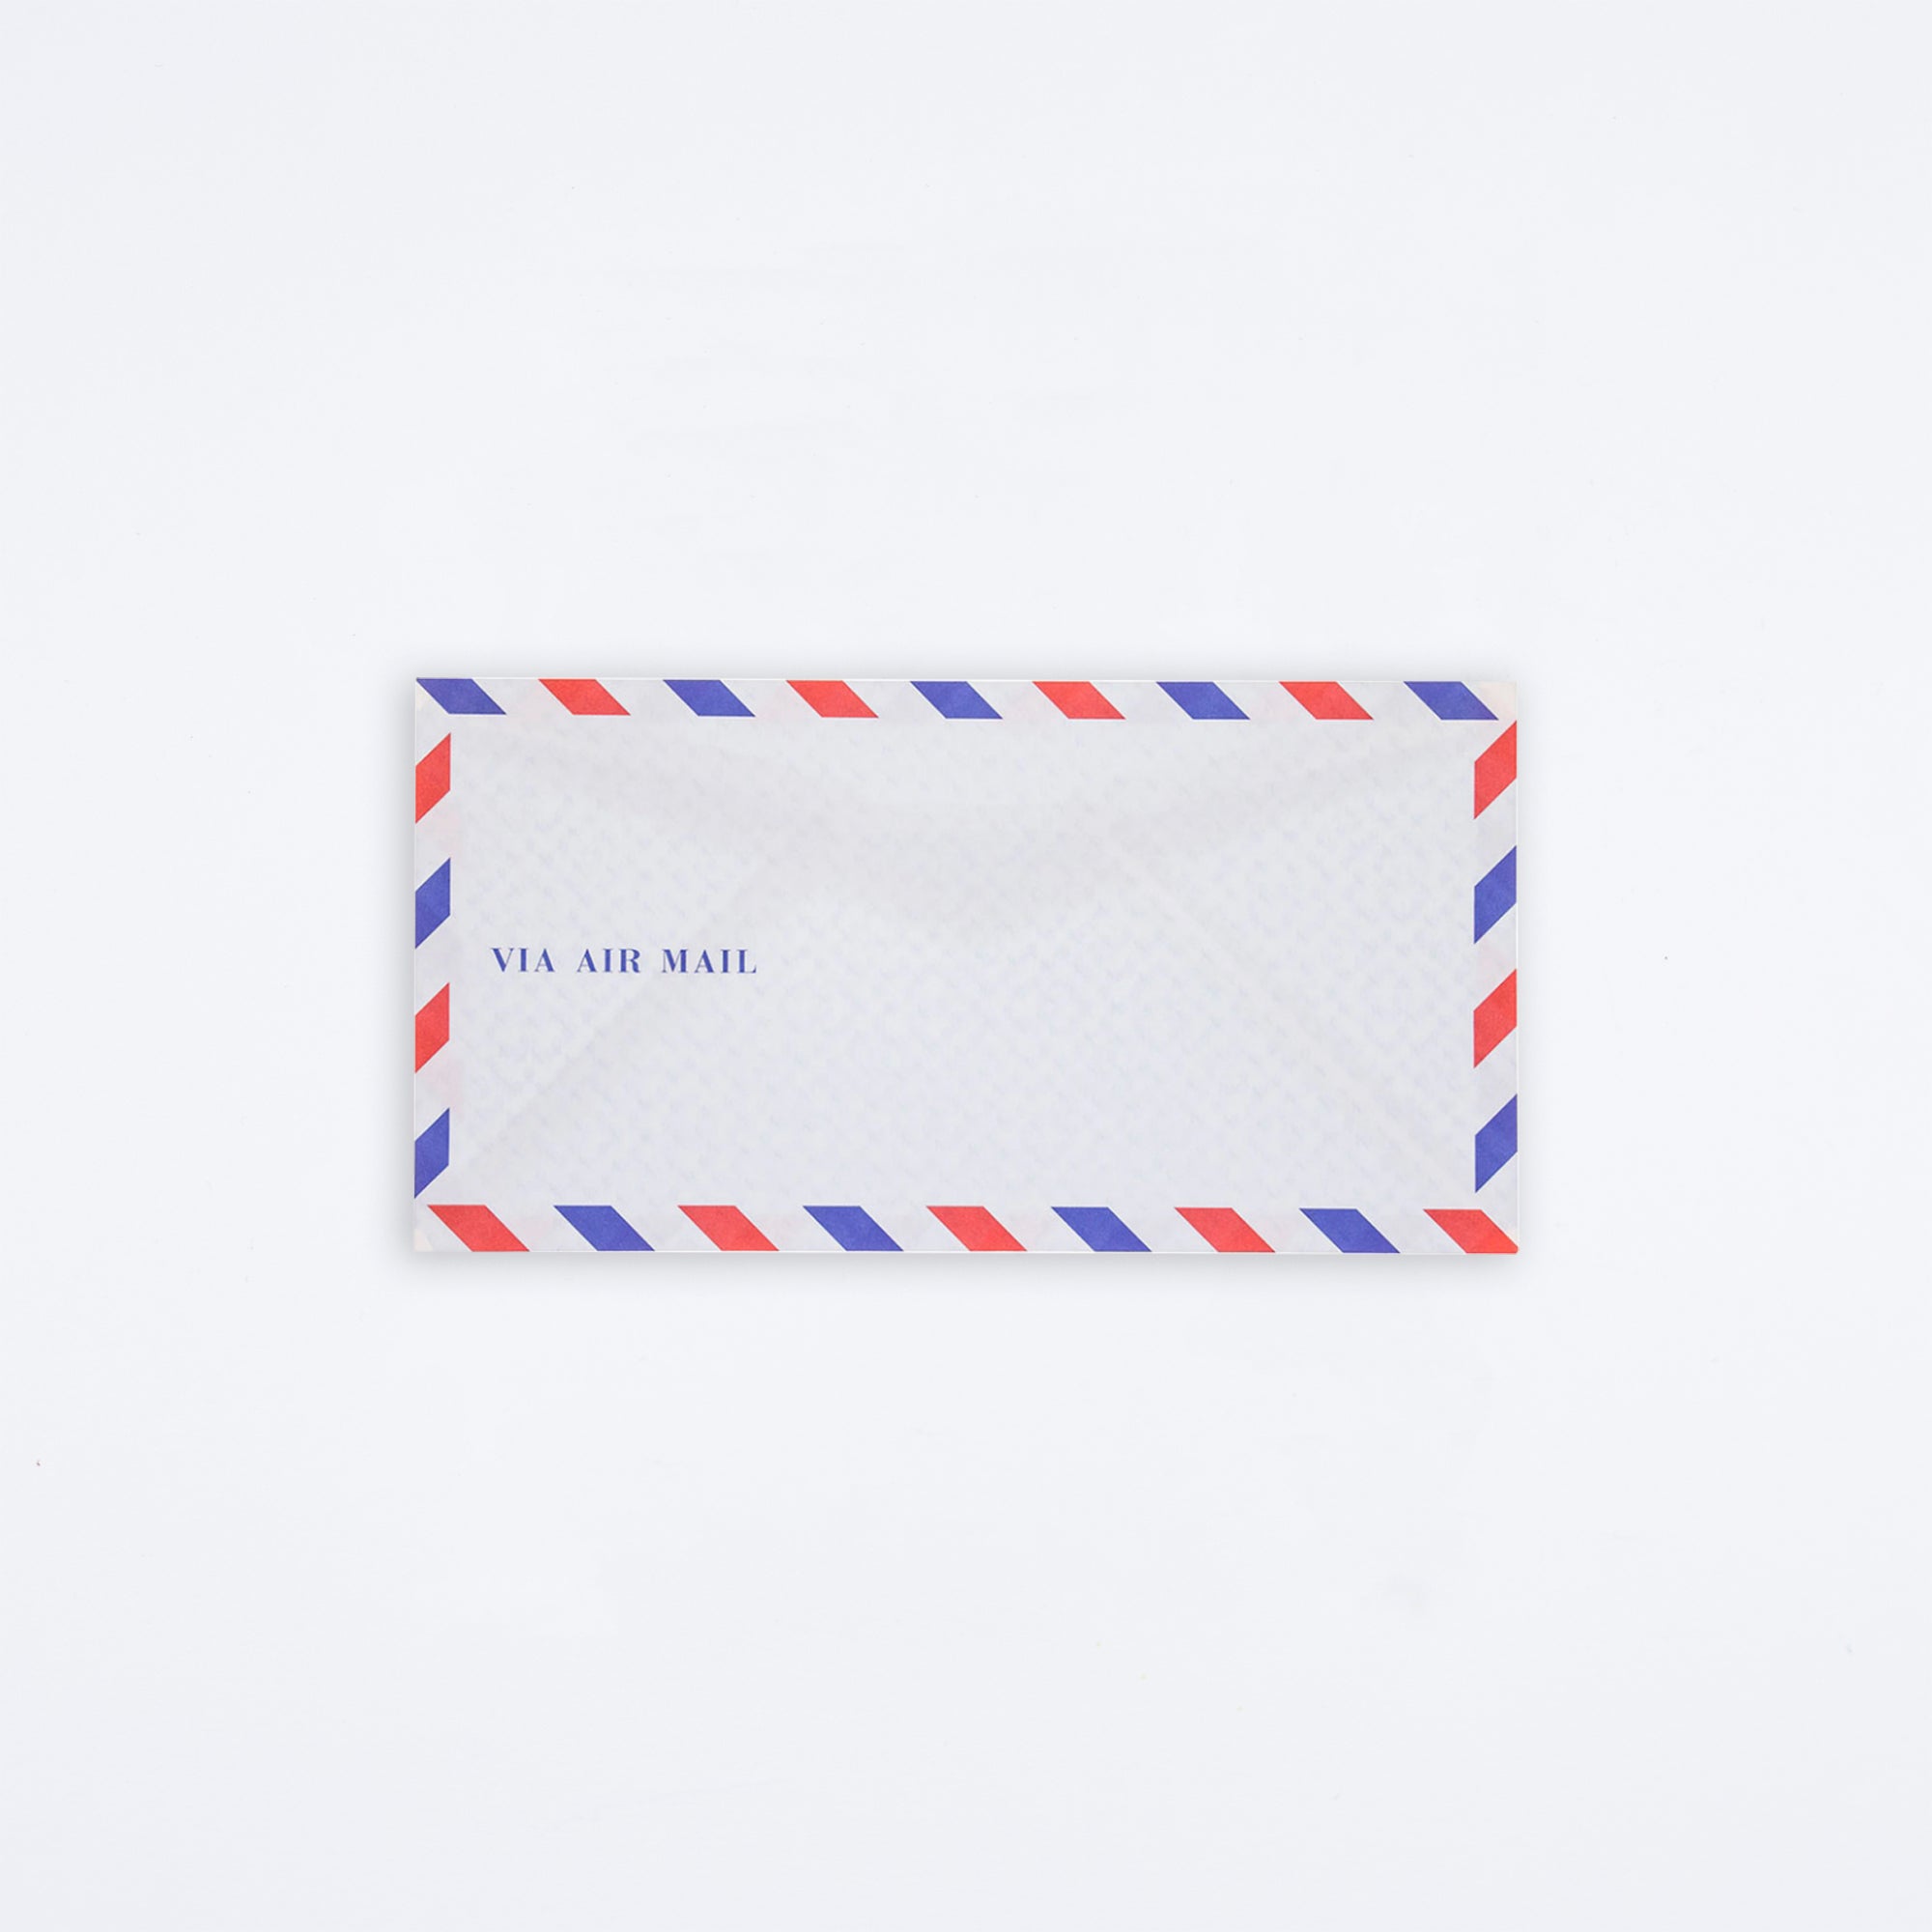 Life 'One Touch' Airmail Envelope